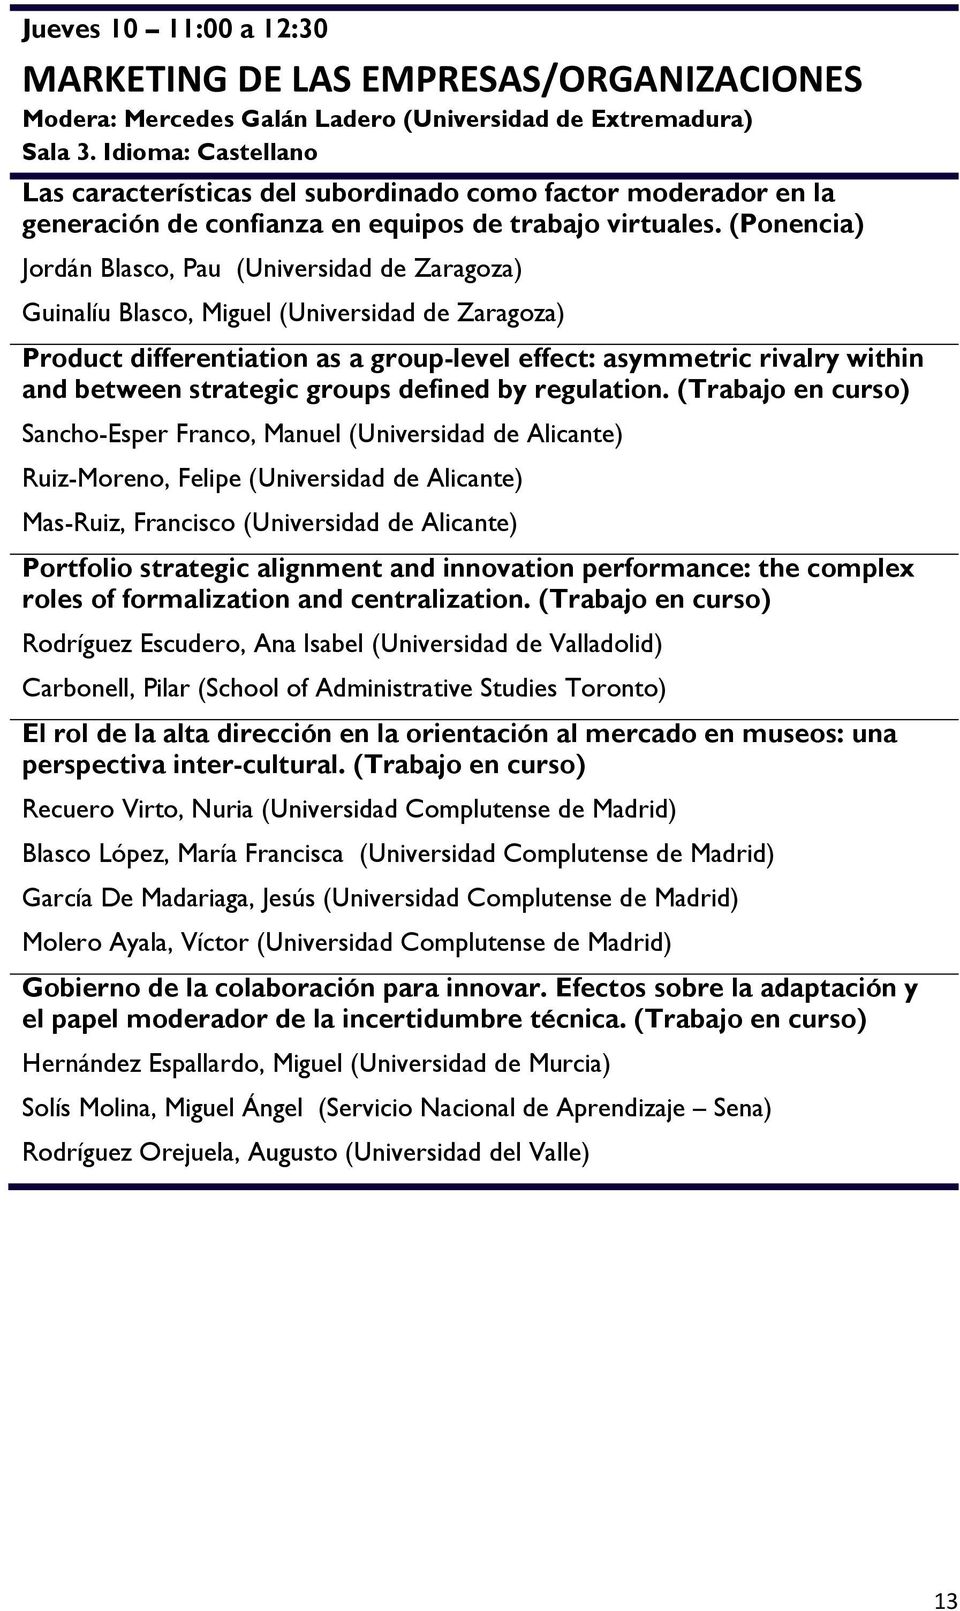 (Ponencia) Jordán Blasco, Pau (Universidad de Zaragoza) Guinalíu Blasco, Miguel (Universidad de Zaragoza) Product differentiation as a group-level effect: asymmetric rivalry within and between